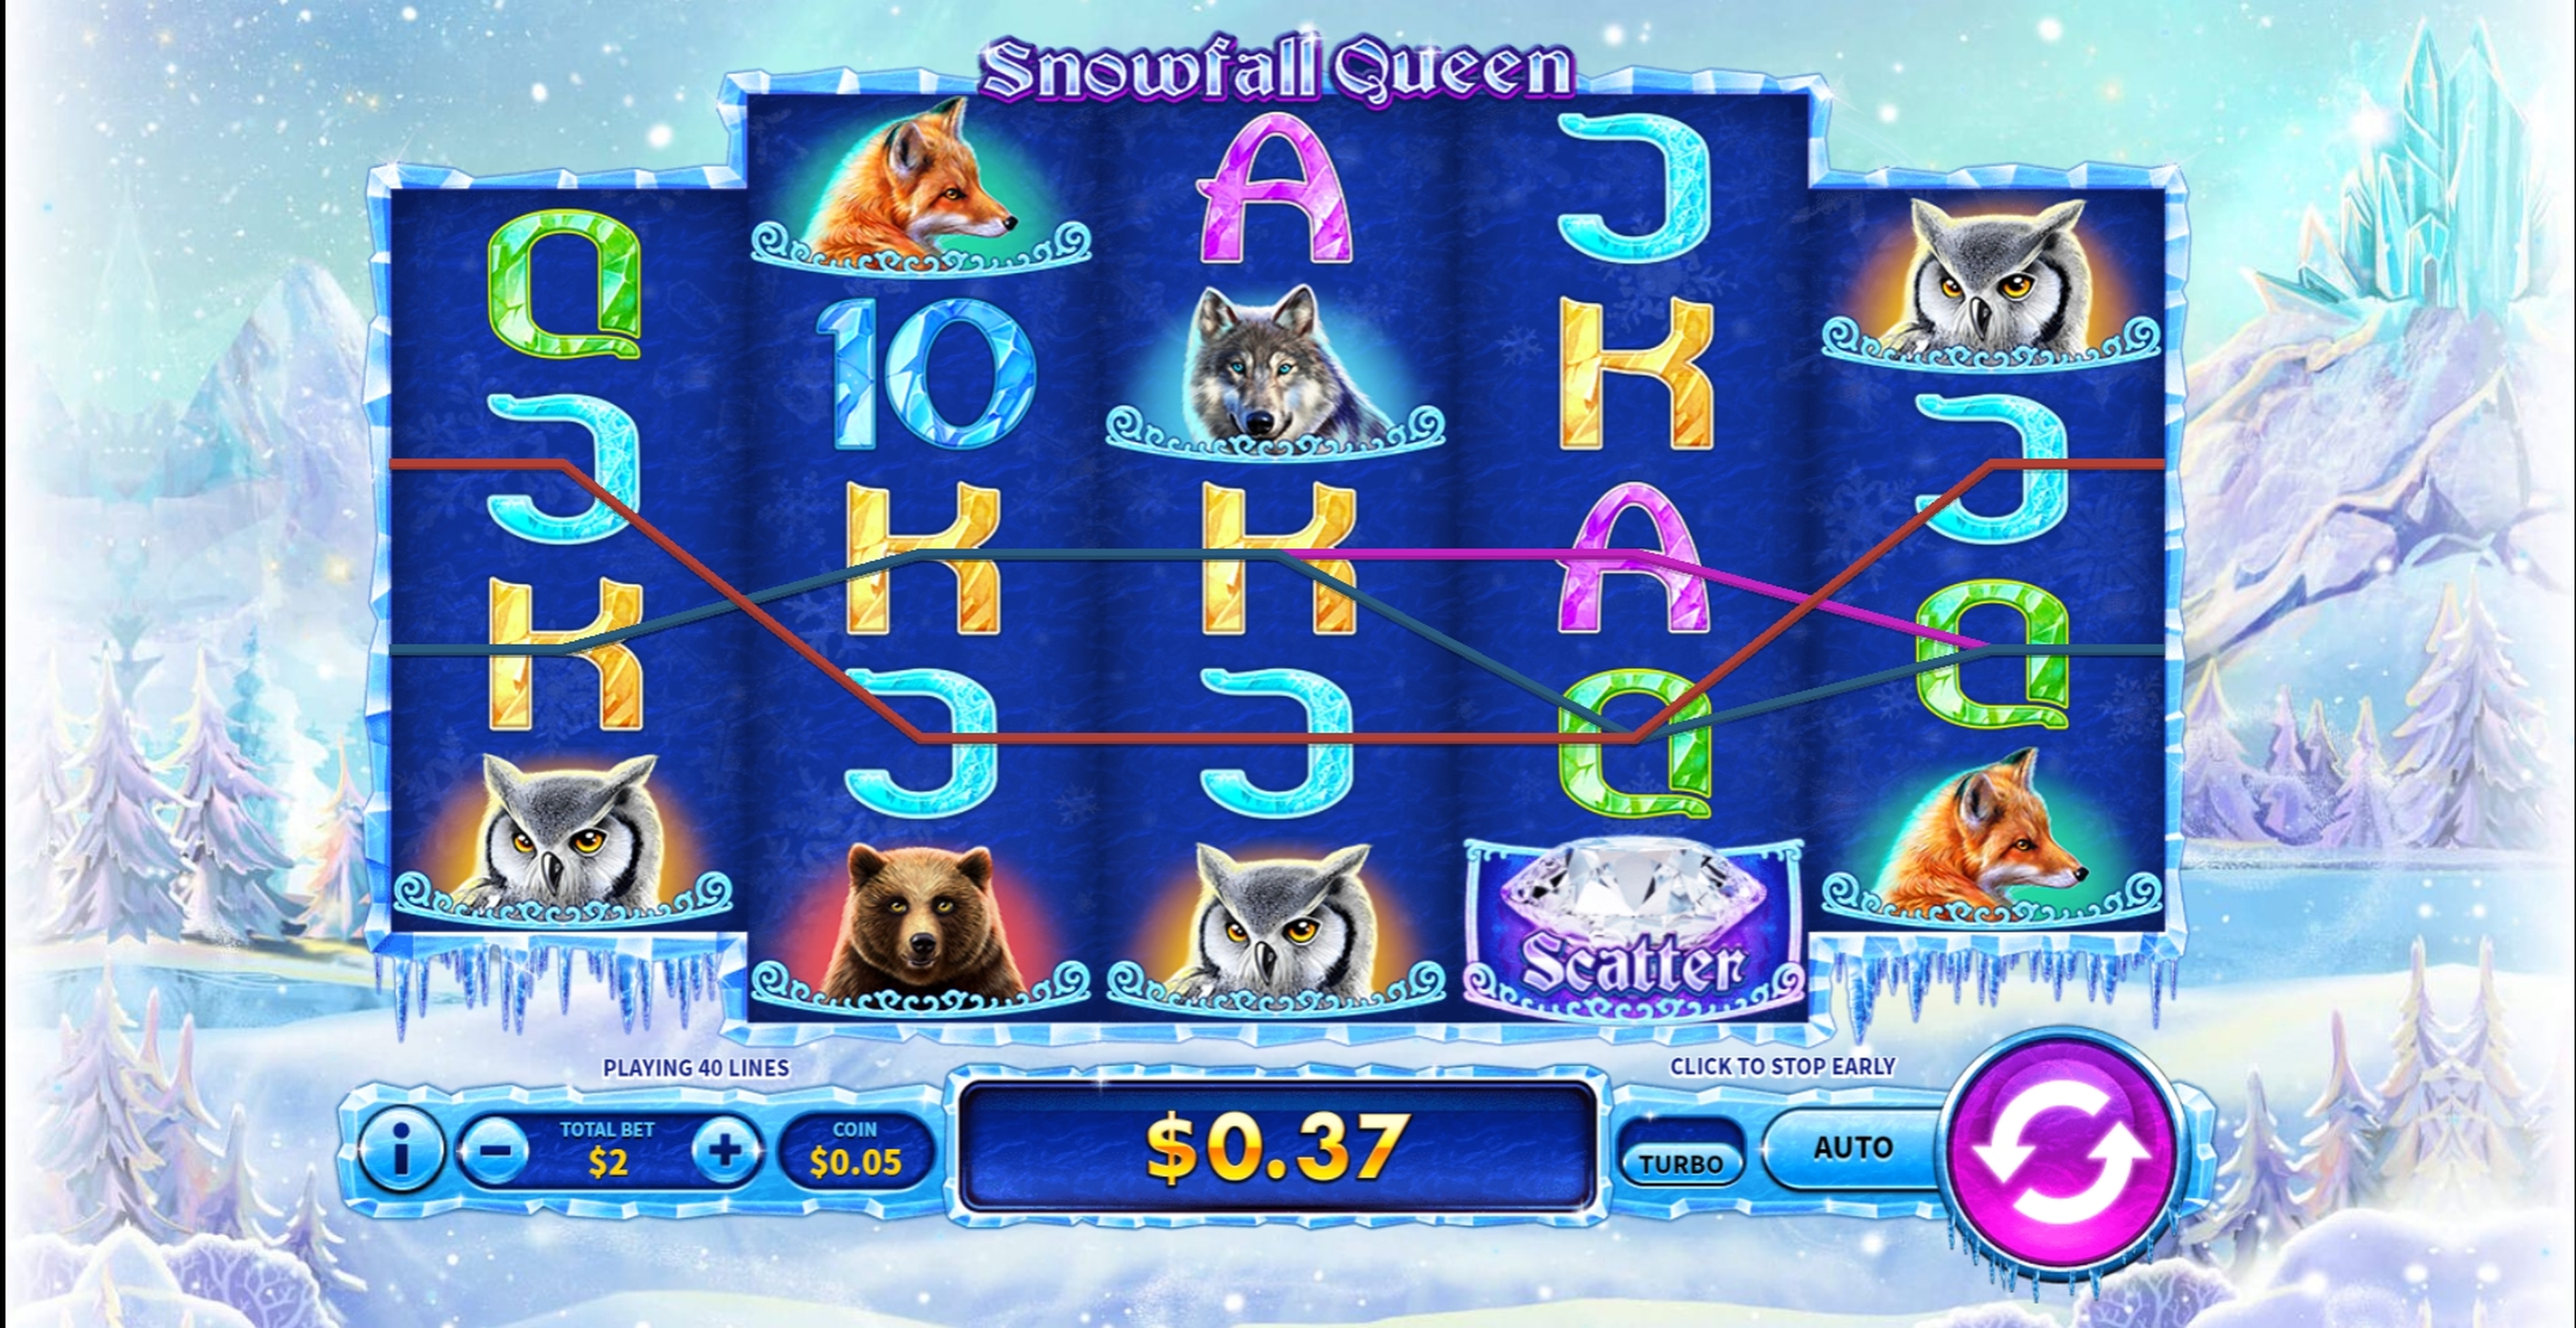 Win Money in Snowfall Queen Free Slot Game by Skywind